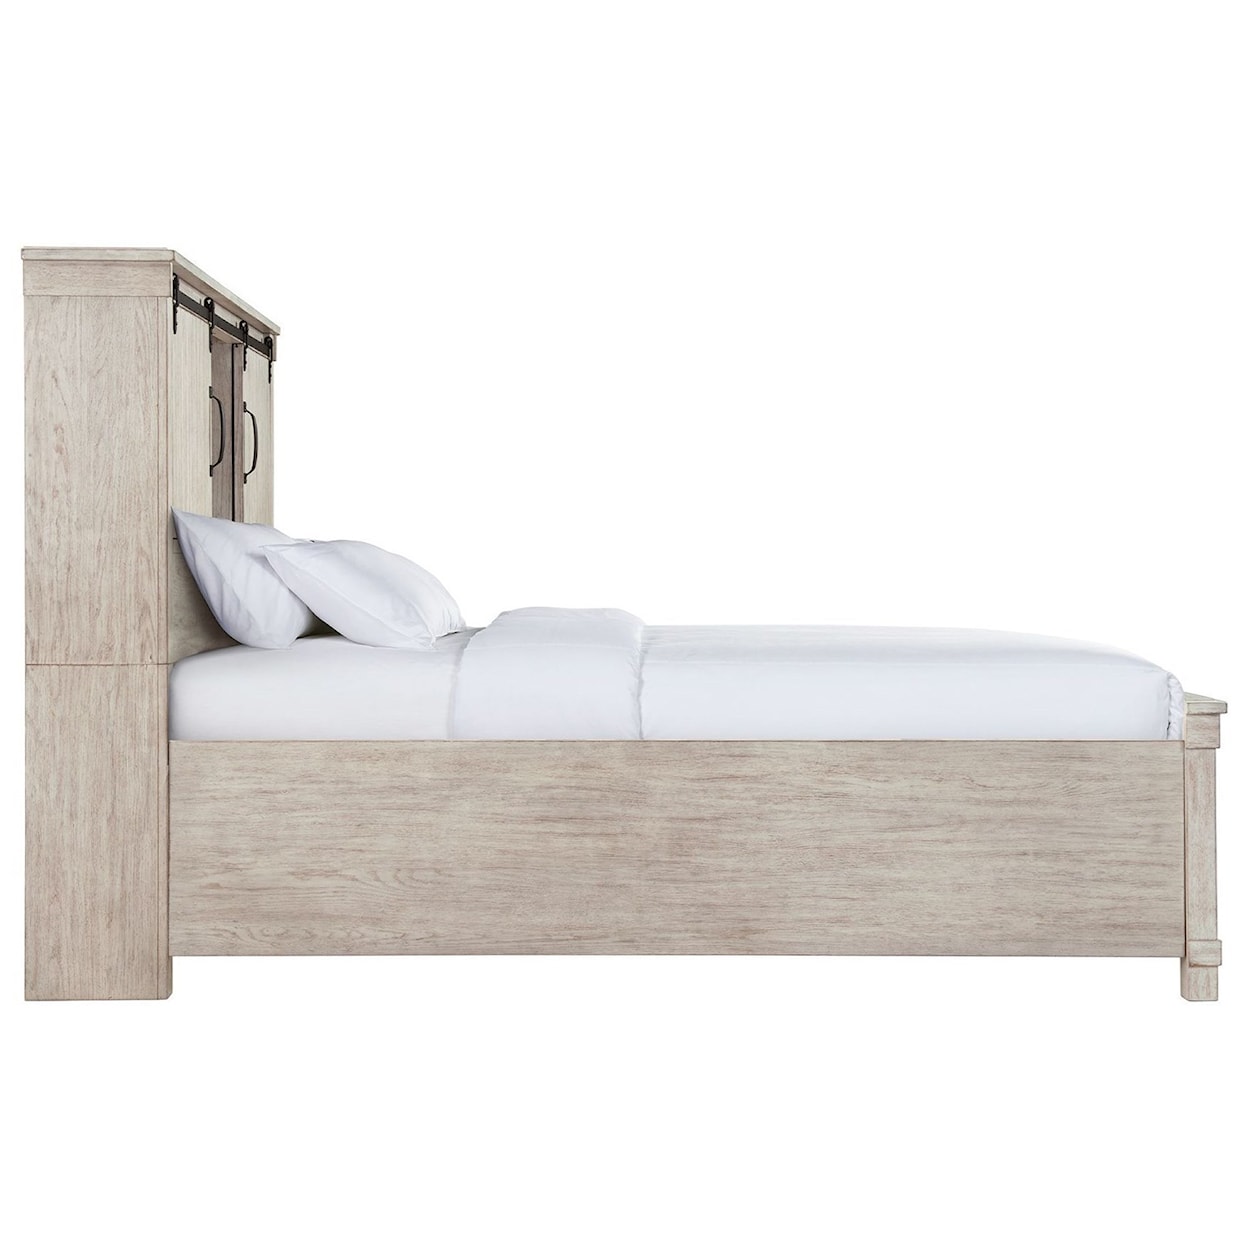 Elements International Yellowstone YELLOWSTONE WHITE QUEEN BED WITH | STORAGE